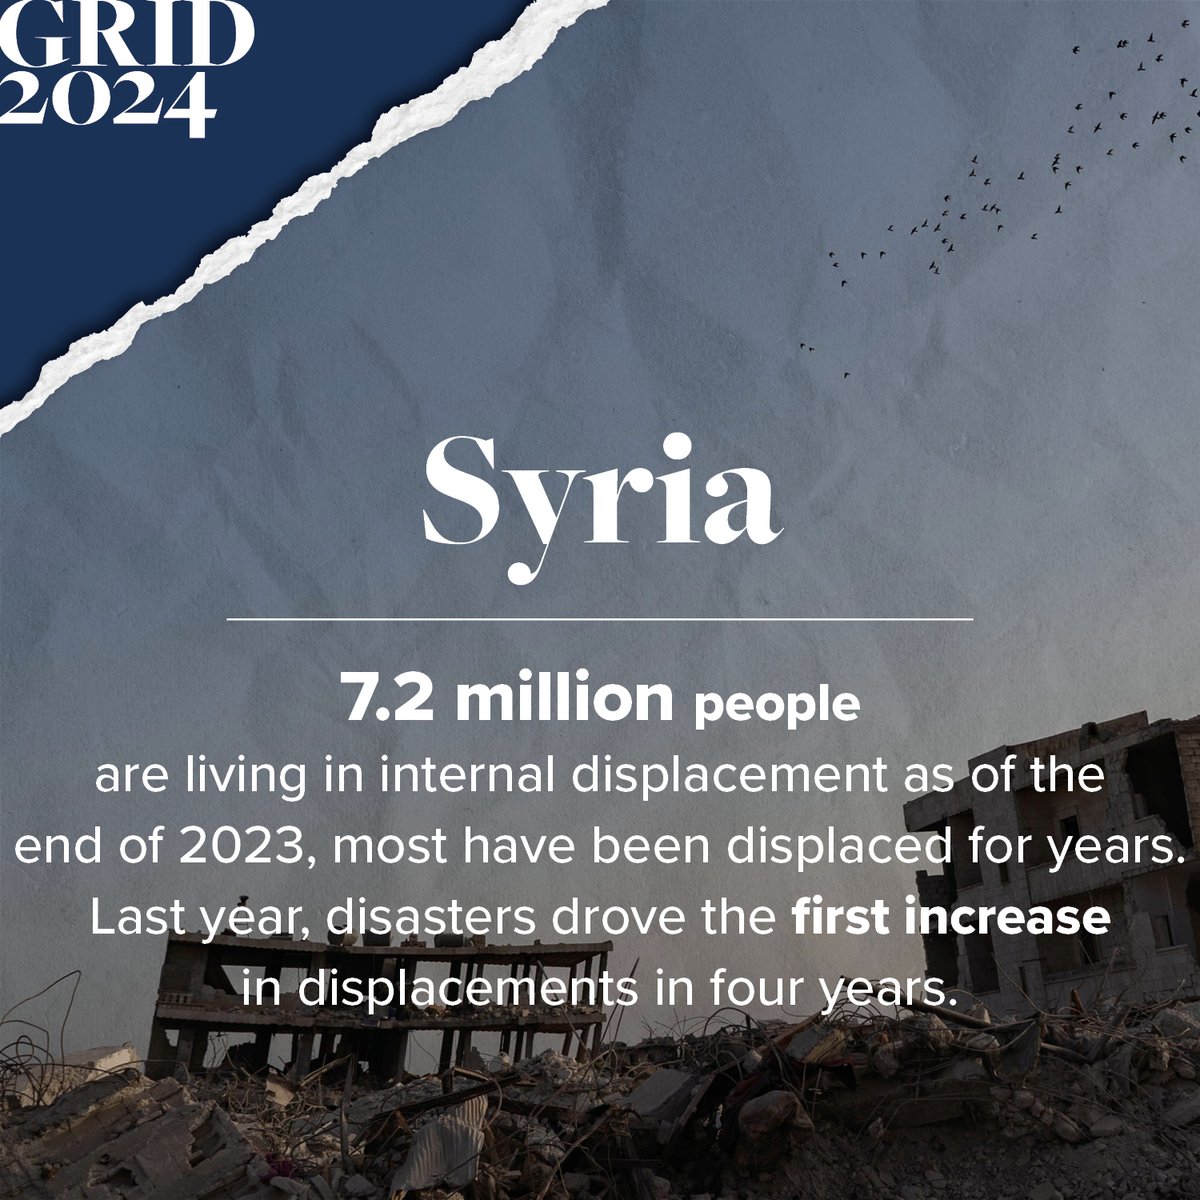 After more than a decade of conflict, millions in #Syria are still living in internal displacement. 

In 2023, earthquakes in Türkiye newly displaced people in north-west Syria. Many had already been displaced by the conflict.

Learn more in #GRID2024👇
bit.ly/3QIX4rJ